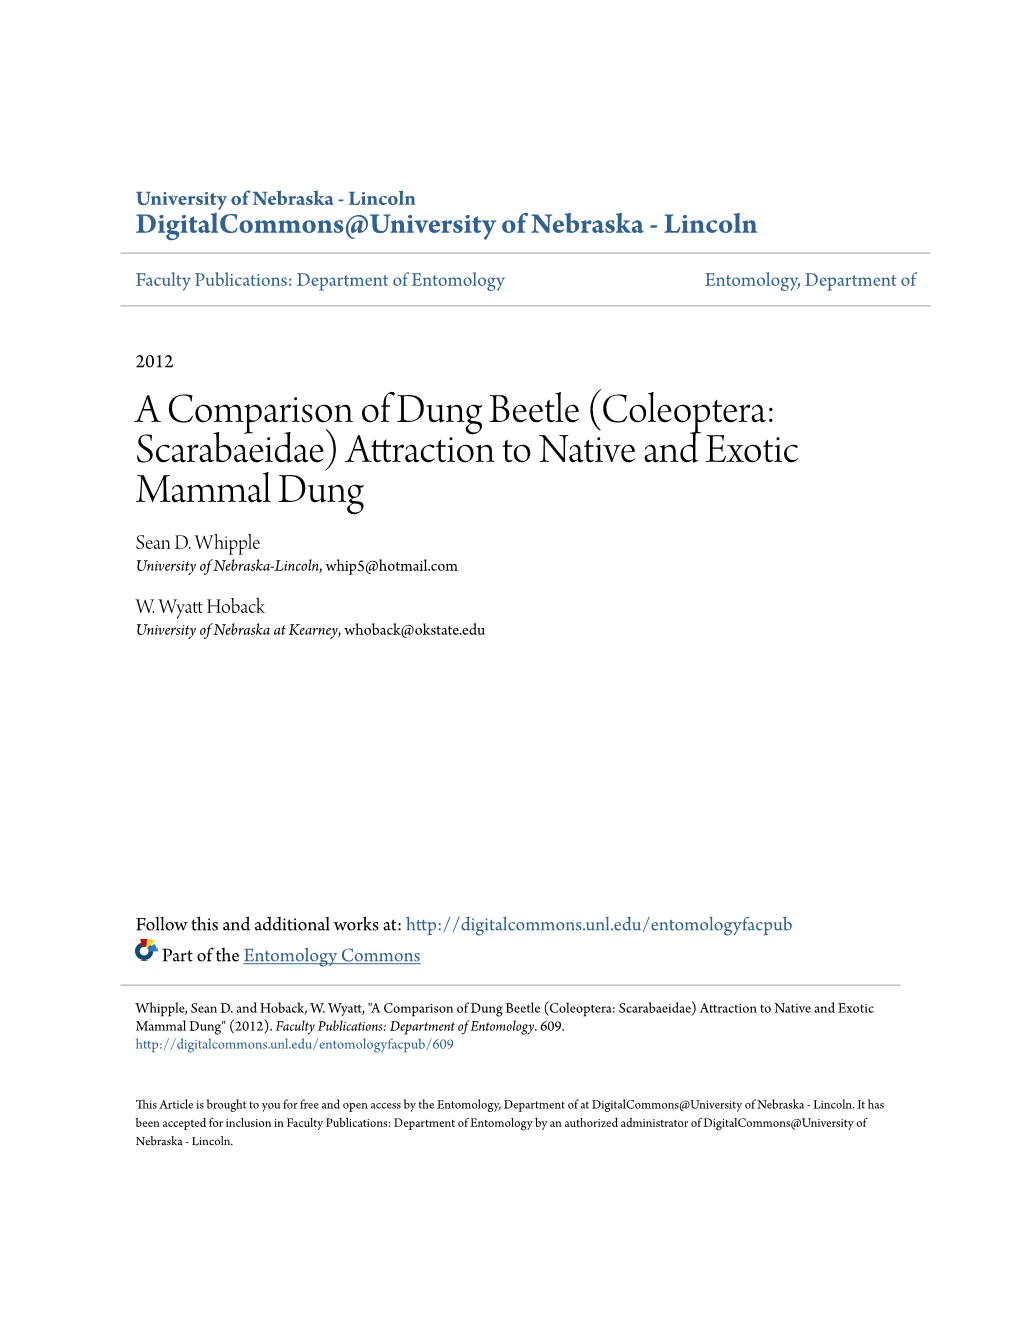 A Comparison of Dung Beetle (Coleoptera: Scarabaeidae) Attraction to Native and Exotic Mammal Dung Sean D